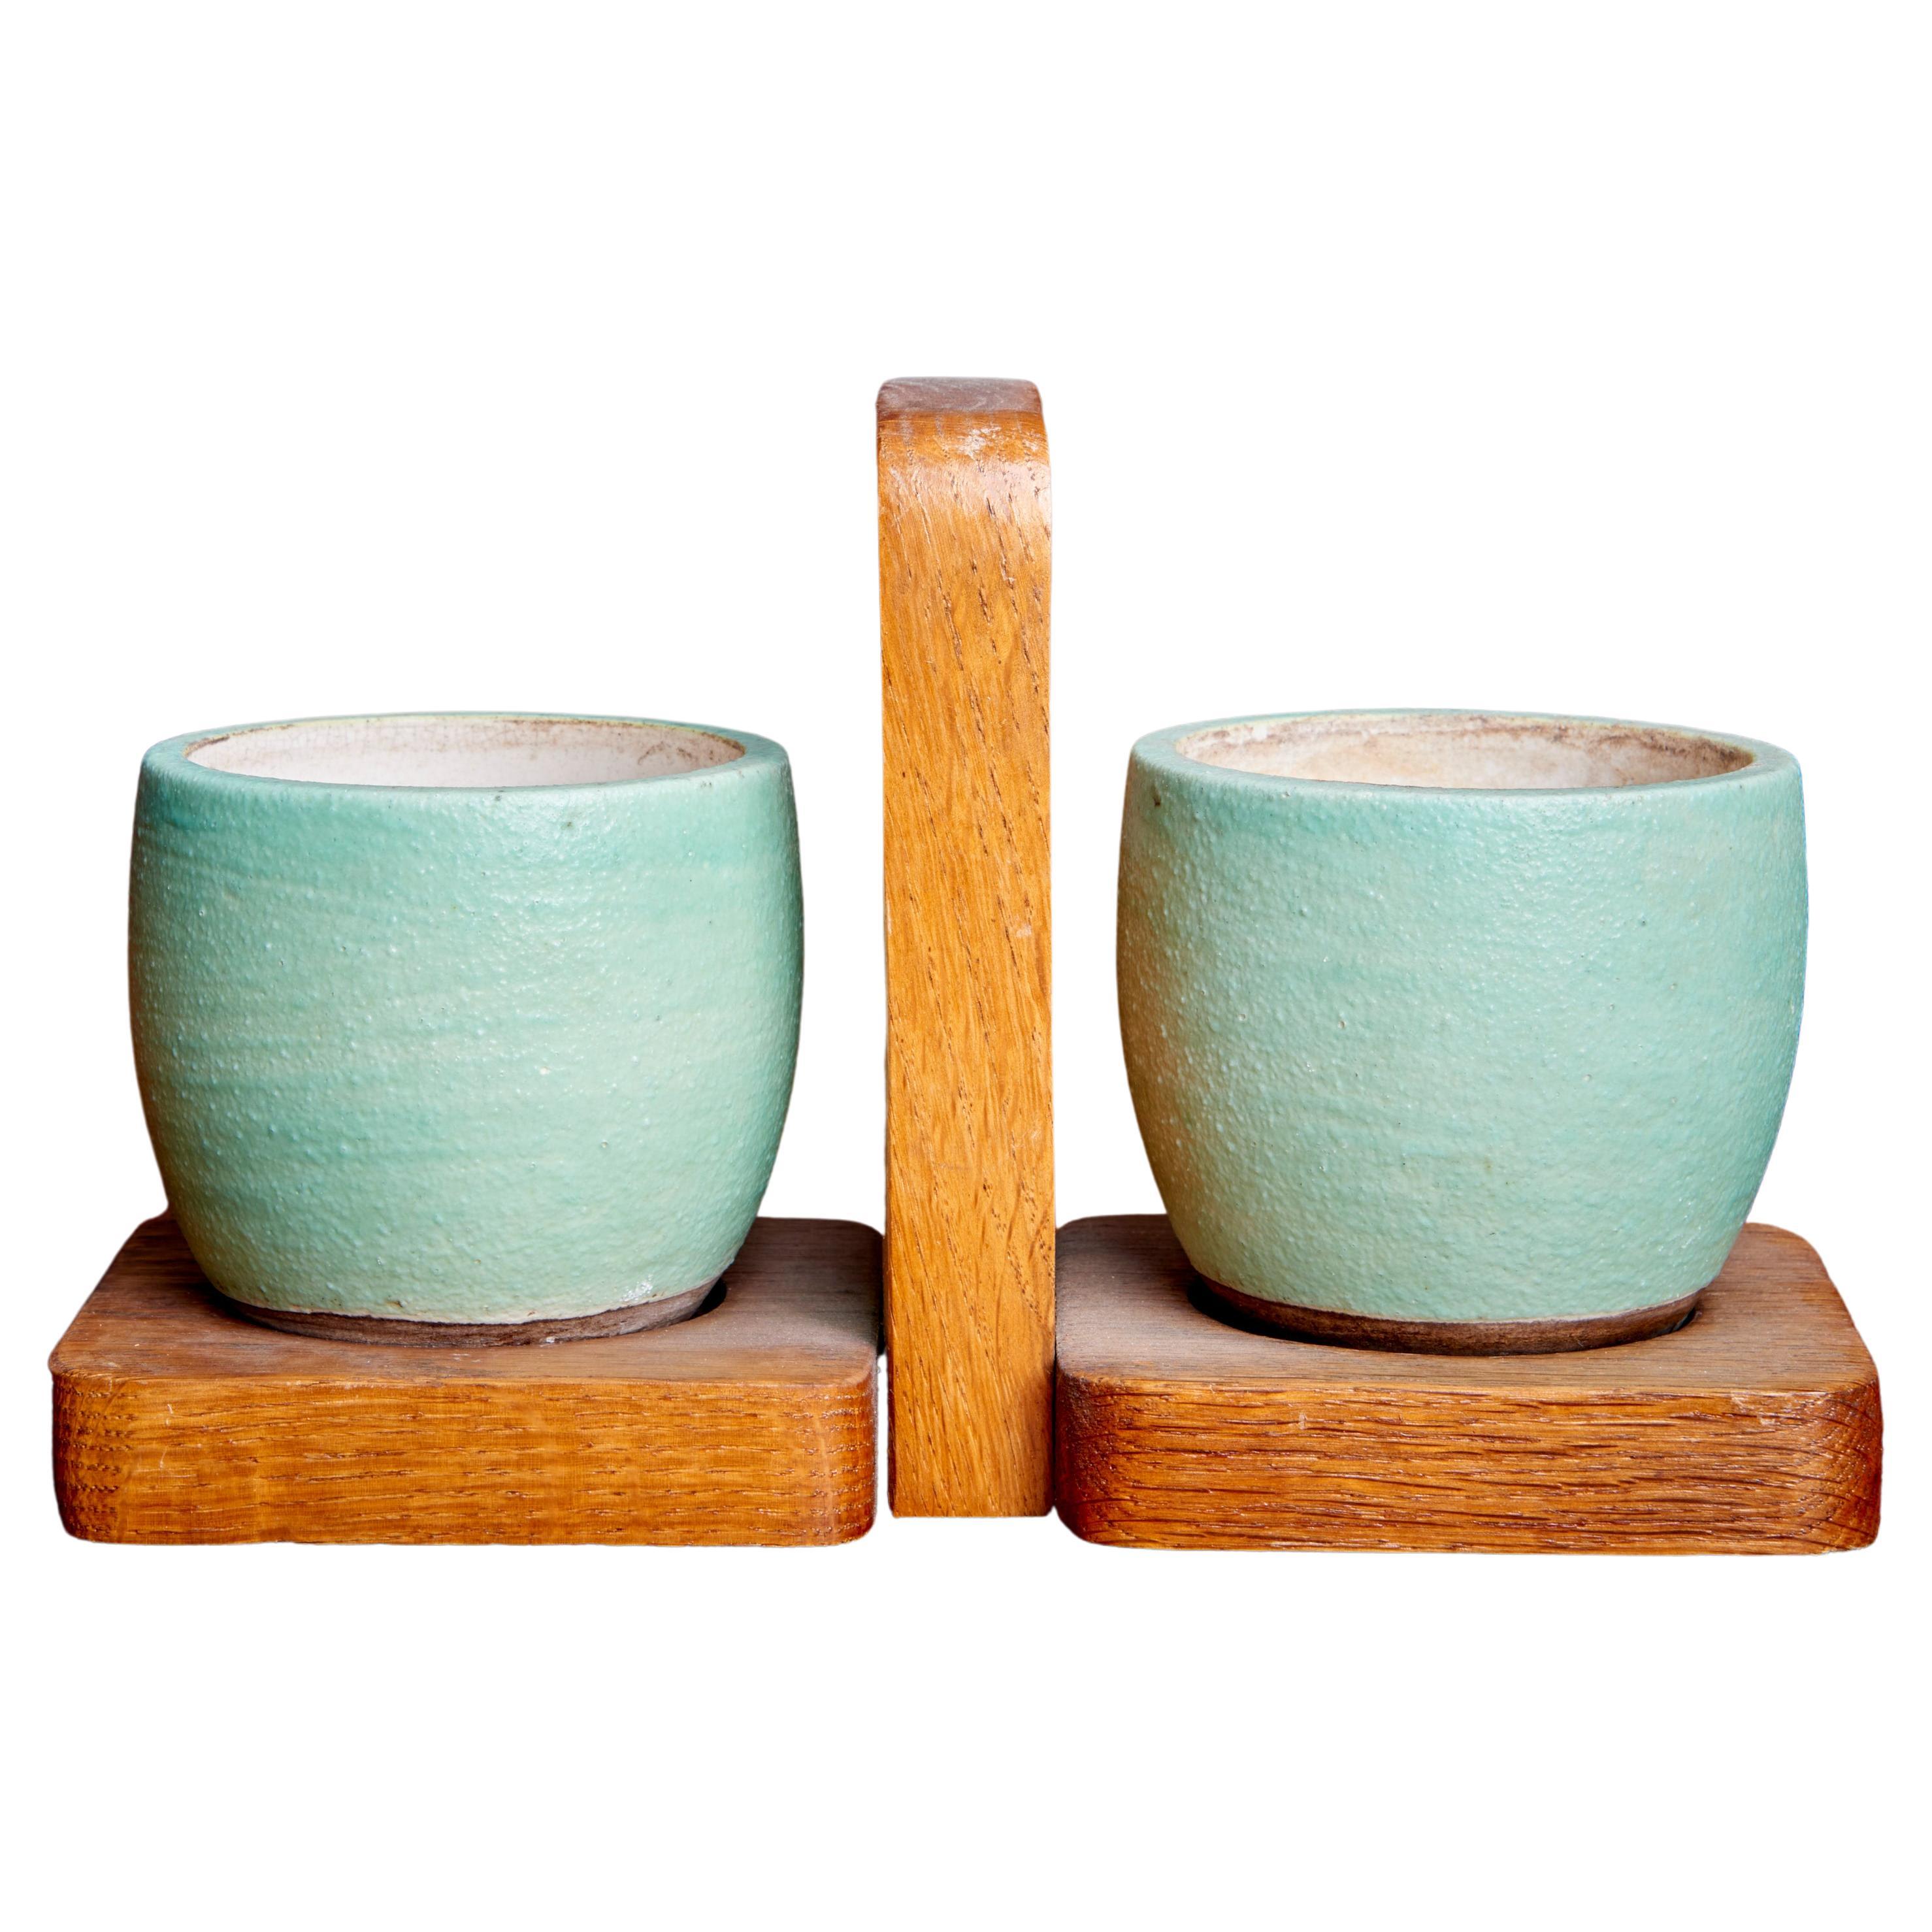 Keramos Ceramic Mugs and Oak Tray in Light Green Turquoise, France, 1950s For Sale